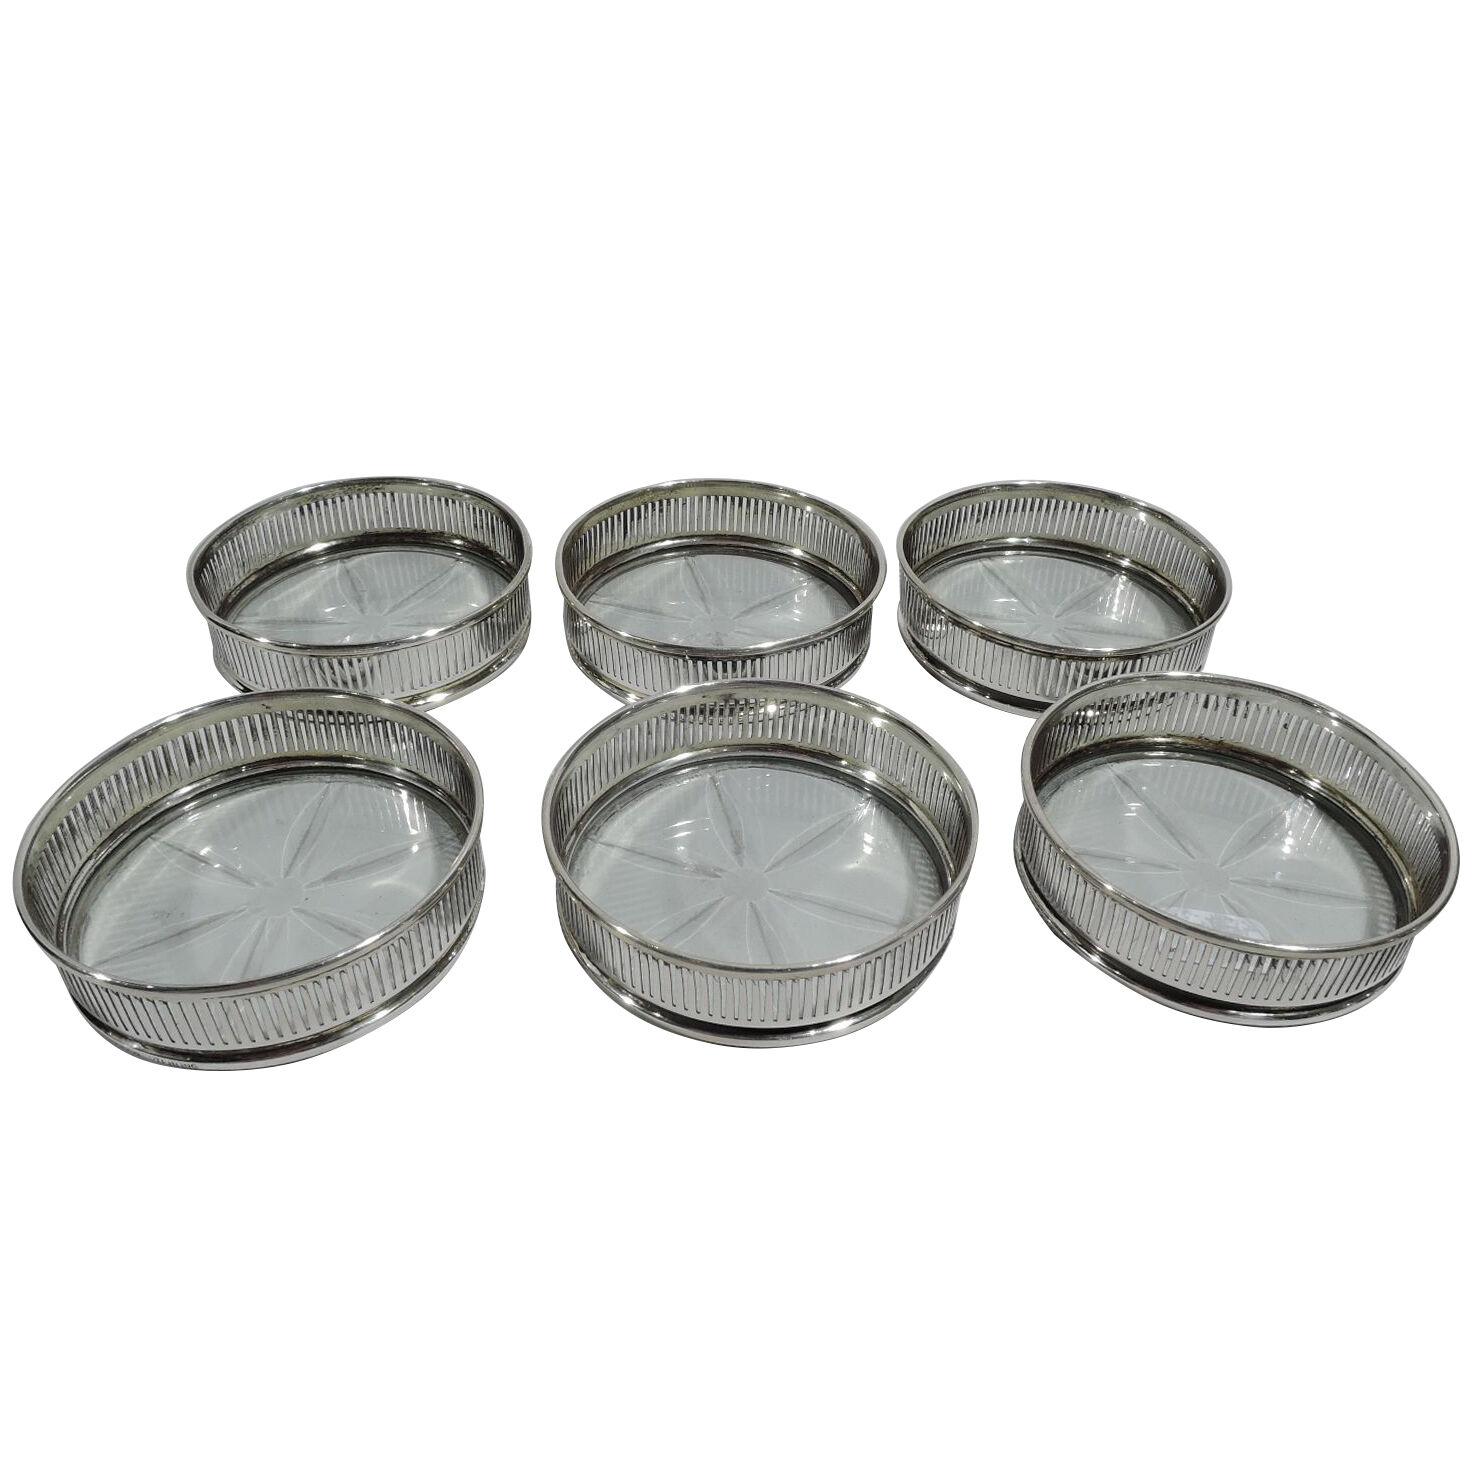 Set of 6 Tiffany Modern Sterling Silver and Glass Coasters